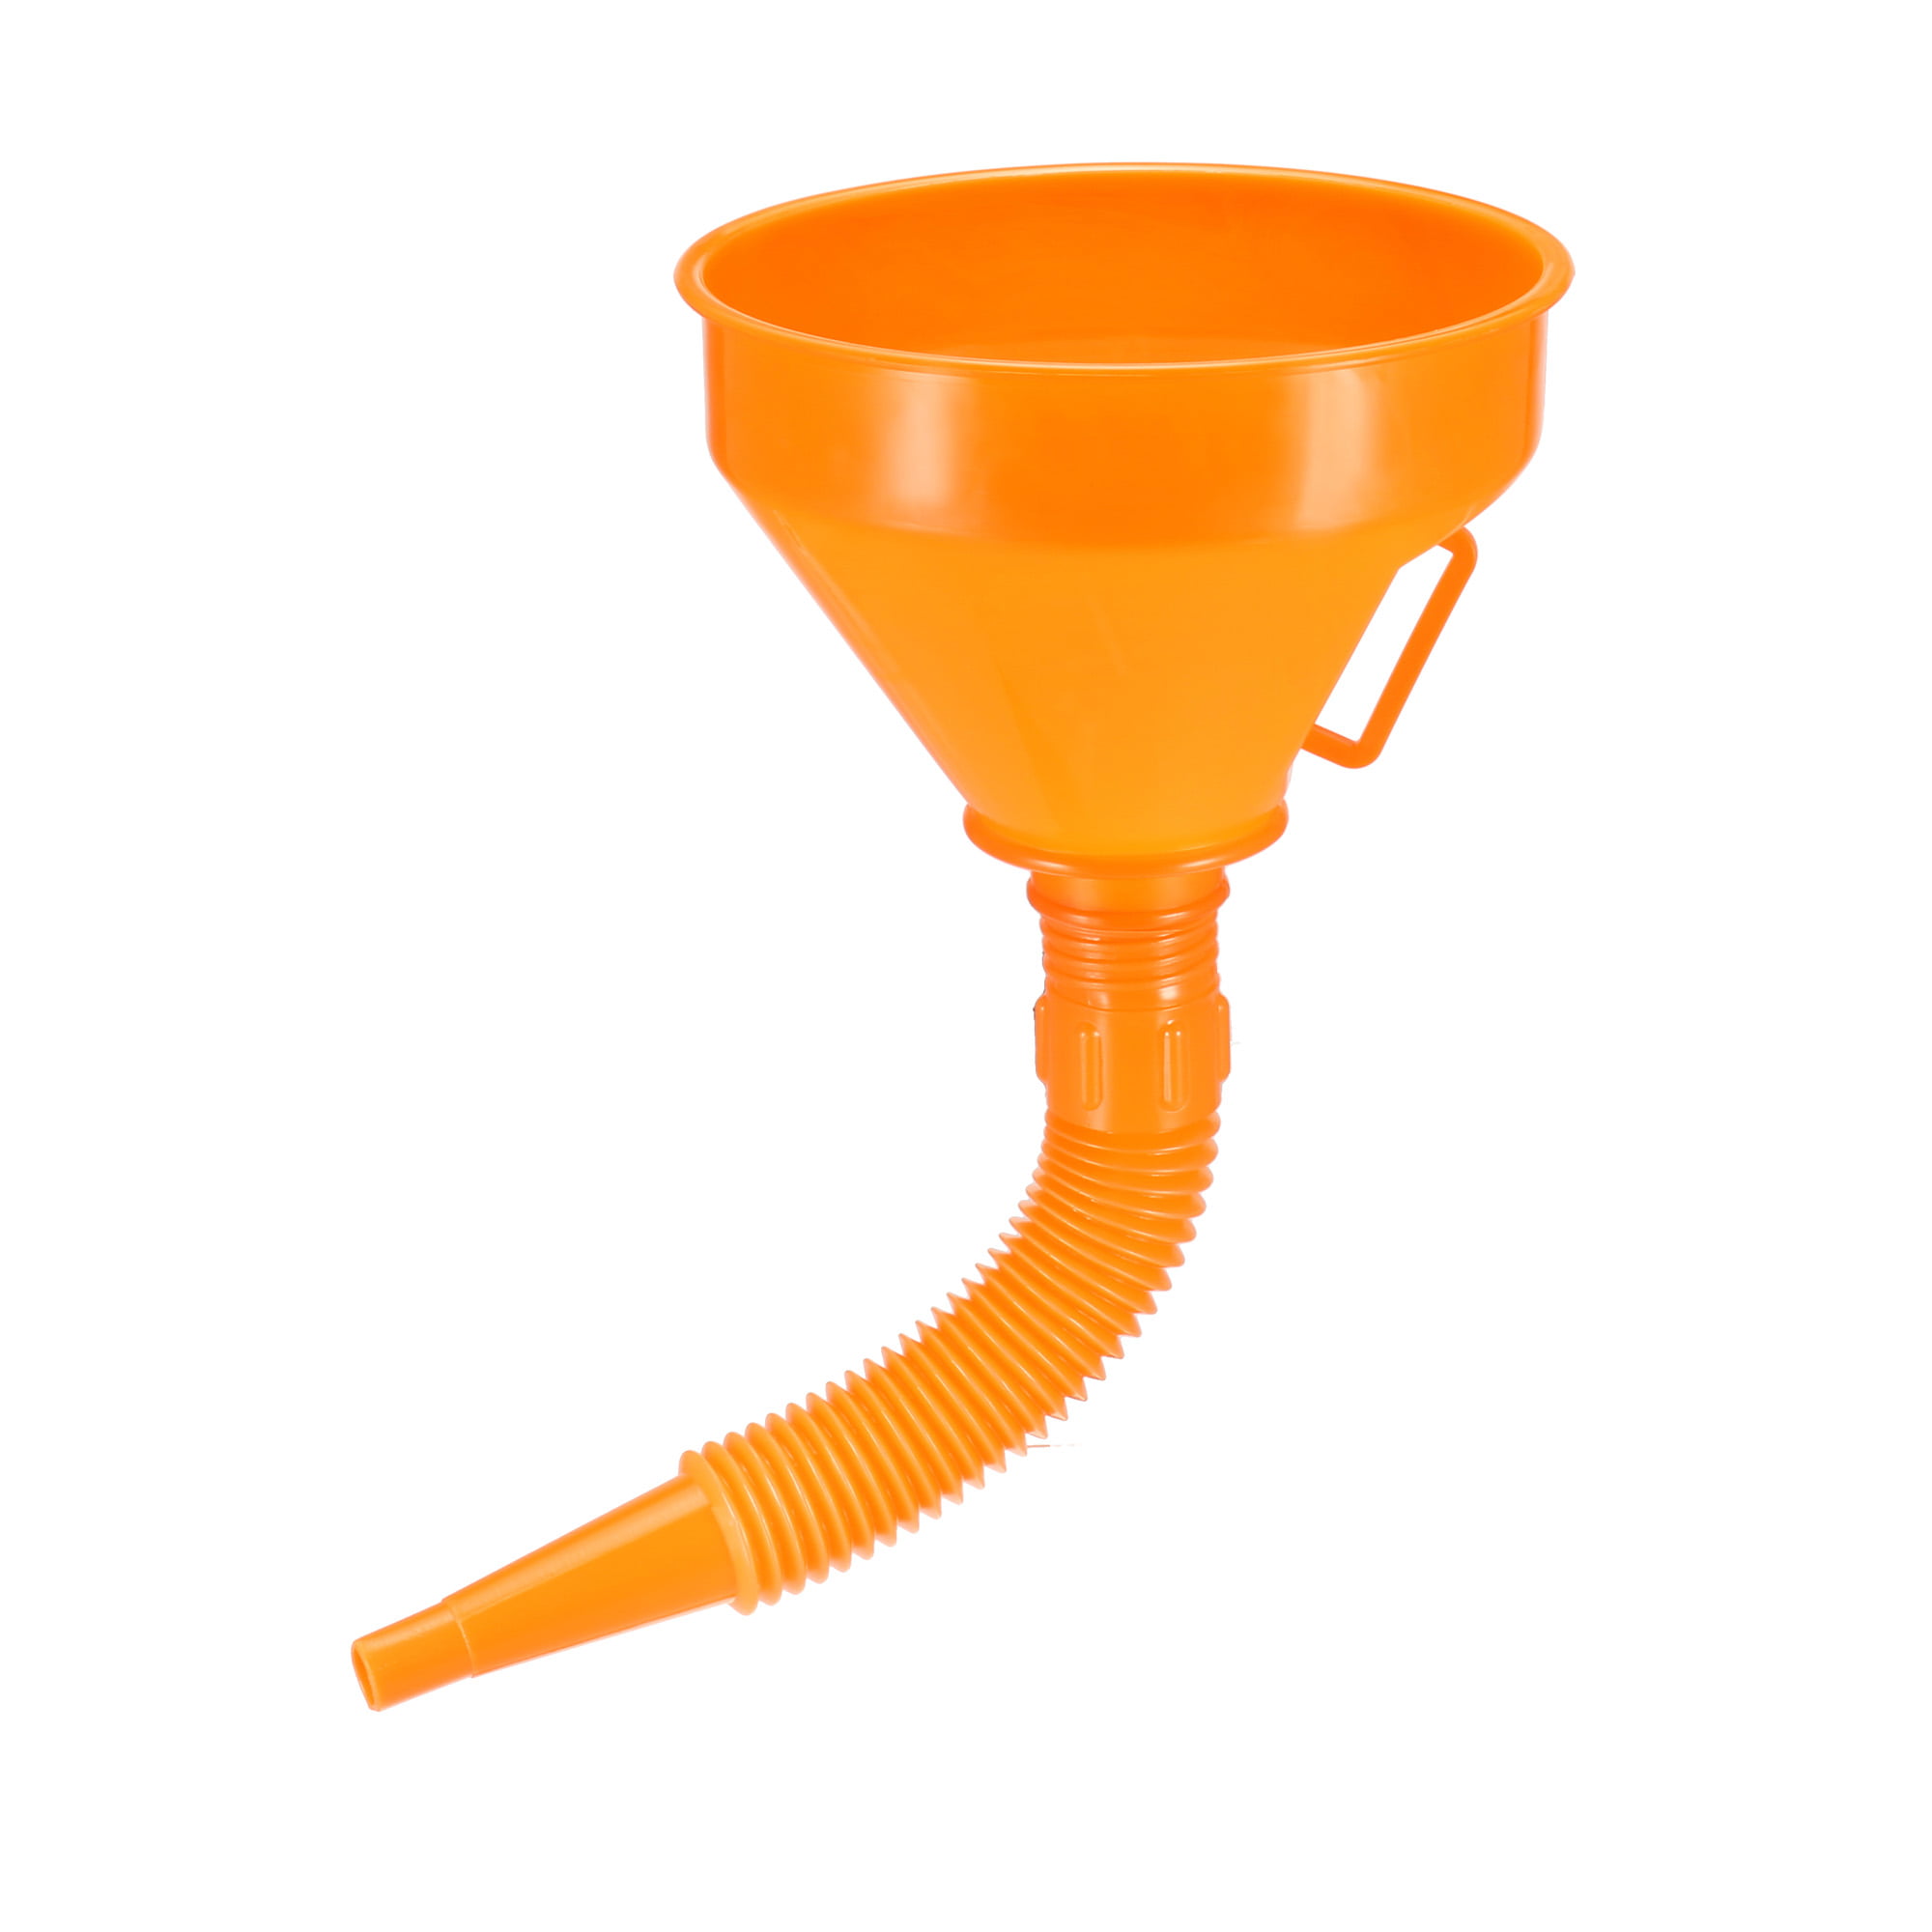 CT0420 Plastic Flexible Fuel Funnel with Filter 